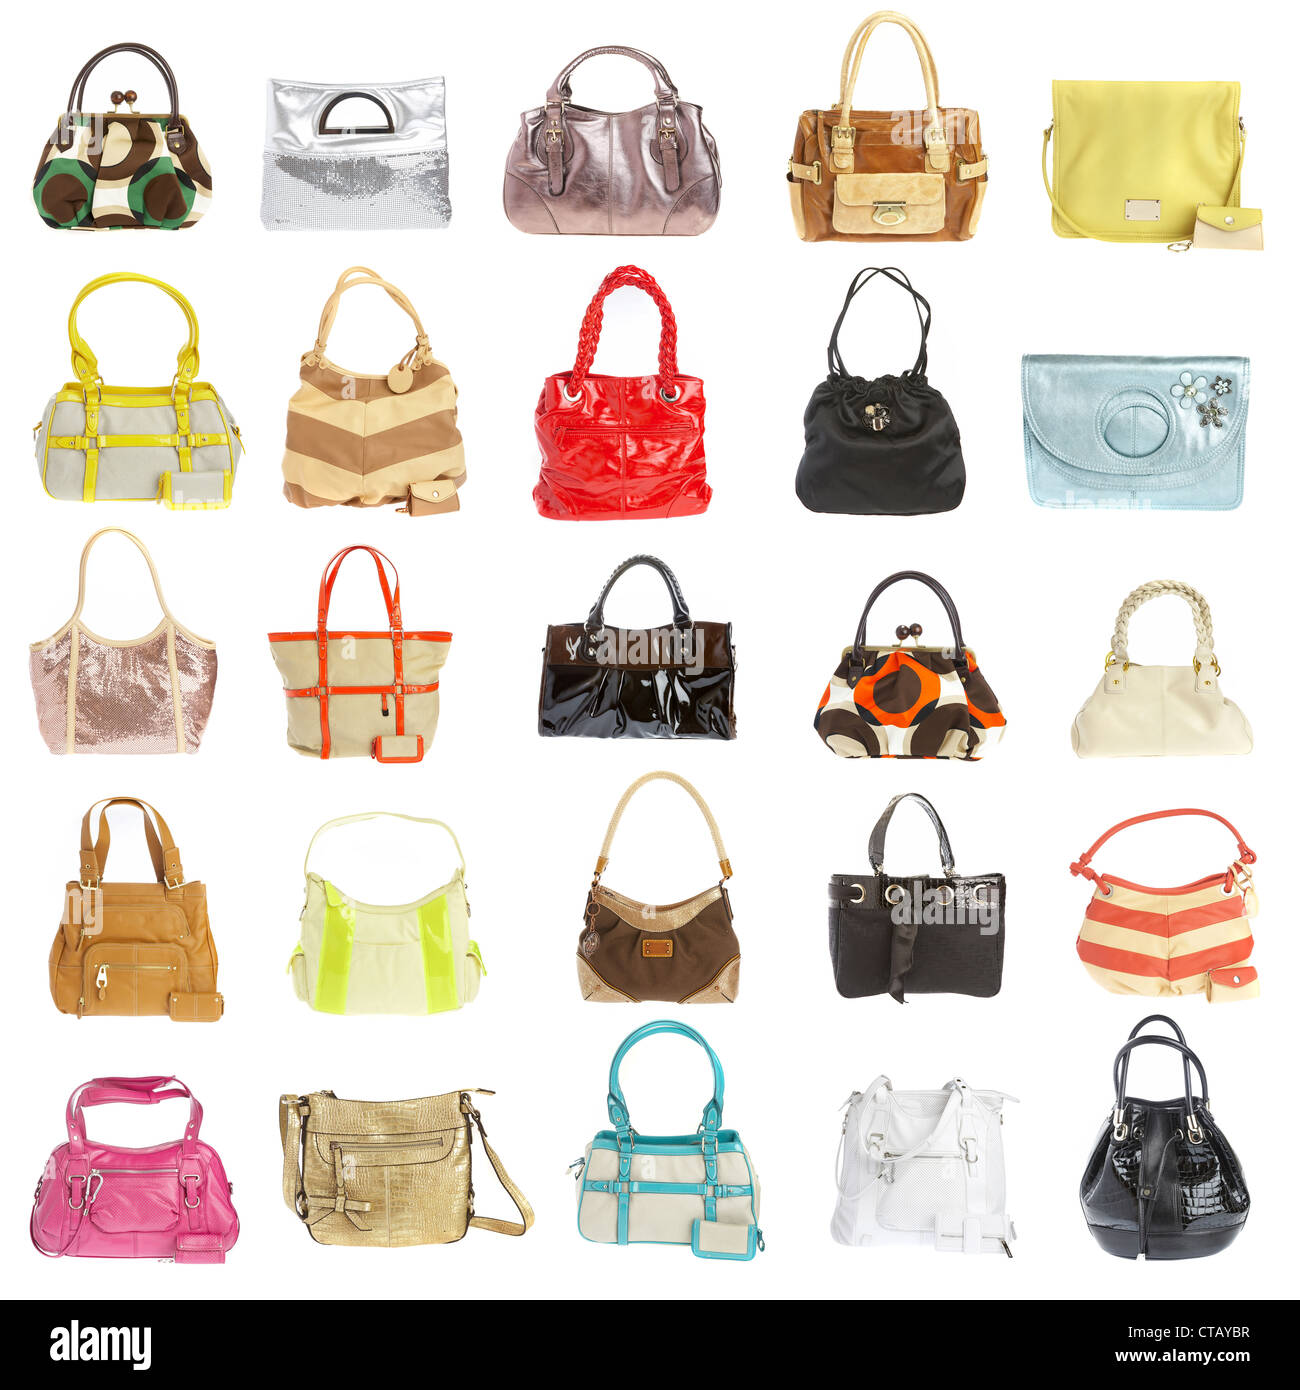 Fashion Tip Friday - What kind of bag do you carry? - Style with Char Studio